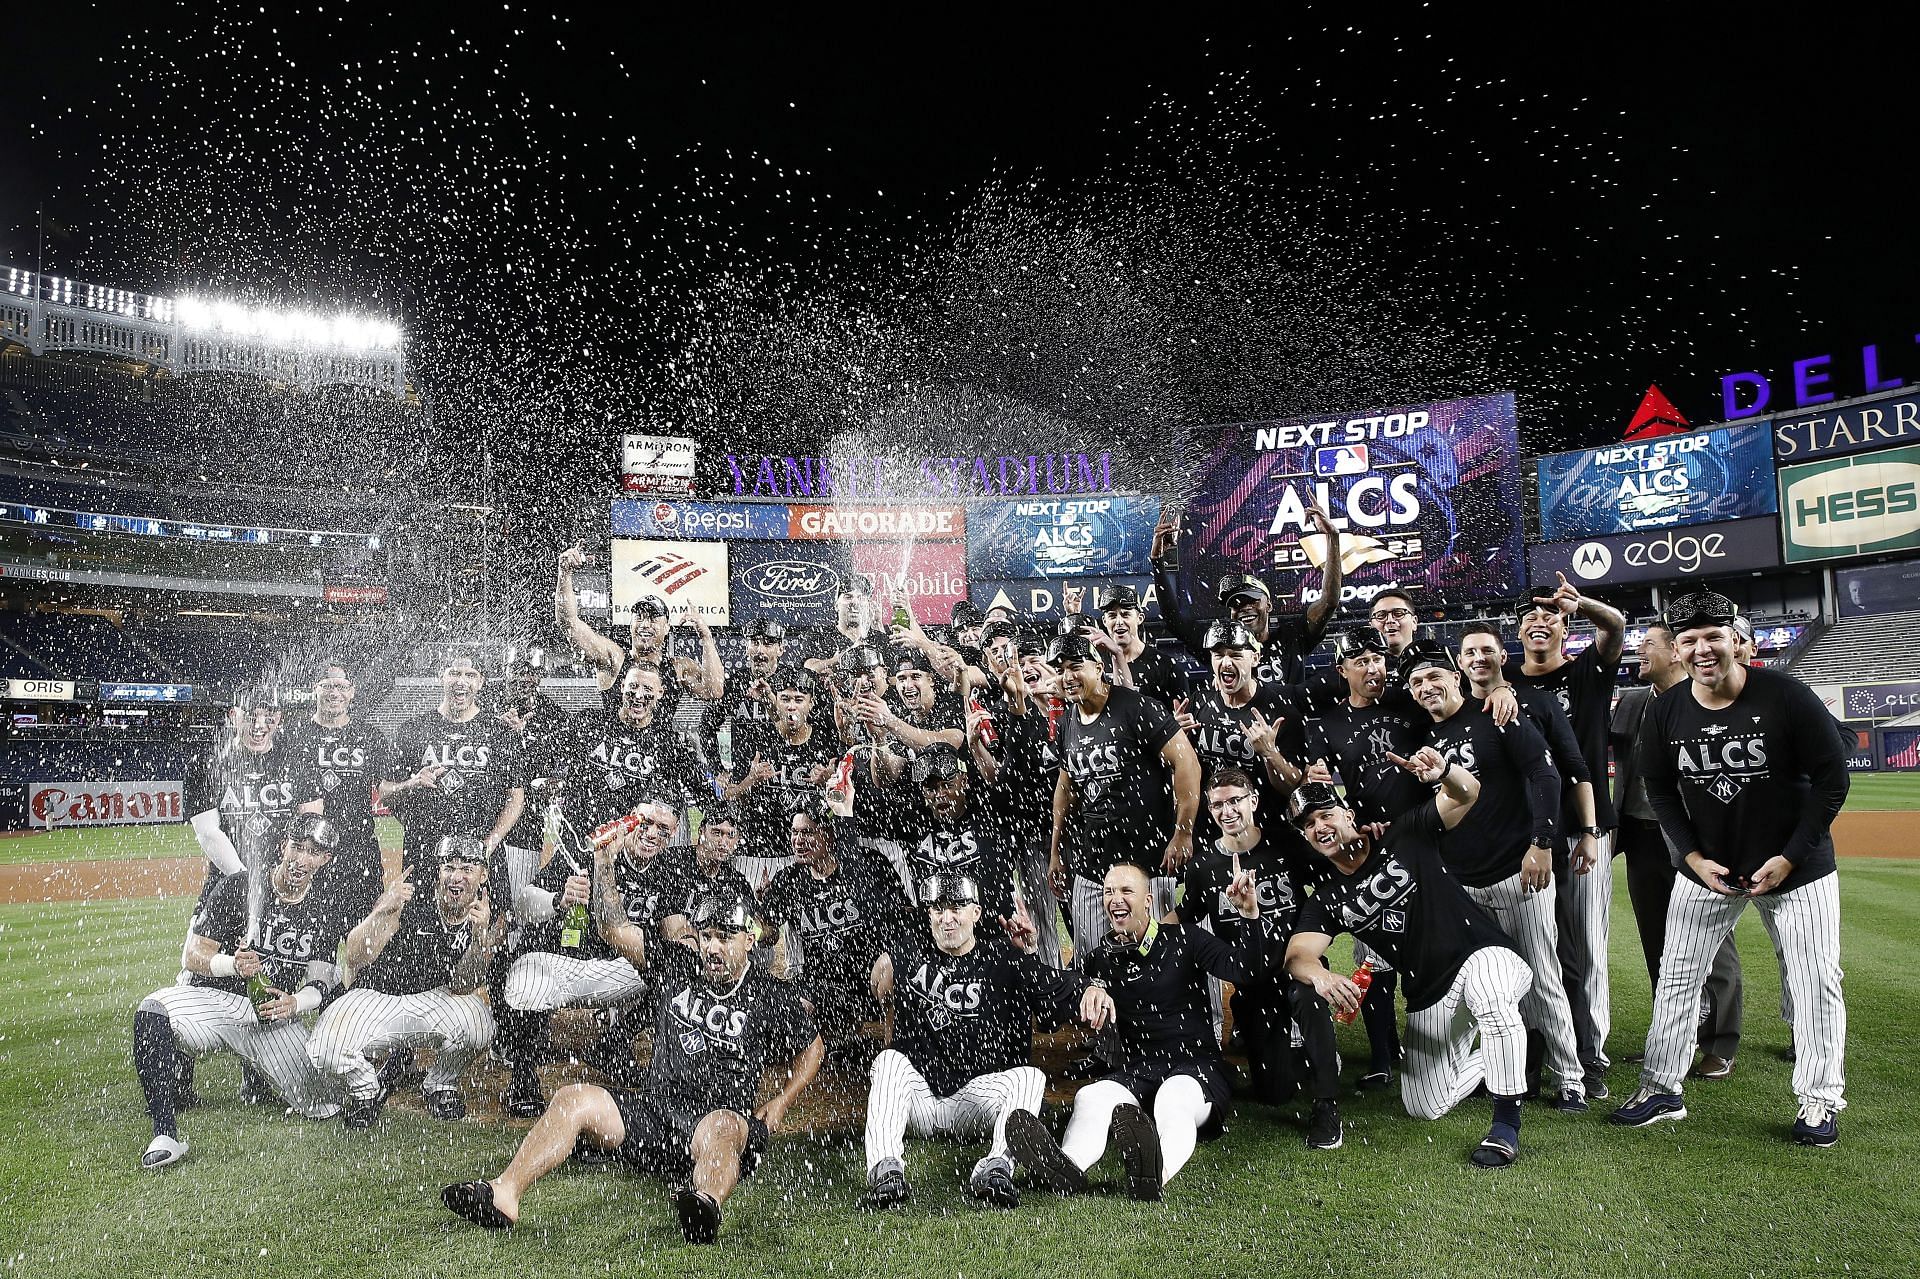 The New York Yankees celebrate their ALDS victory.